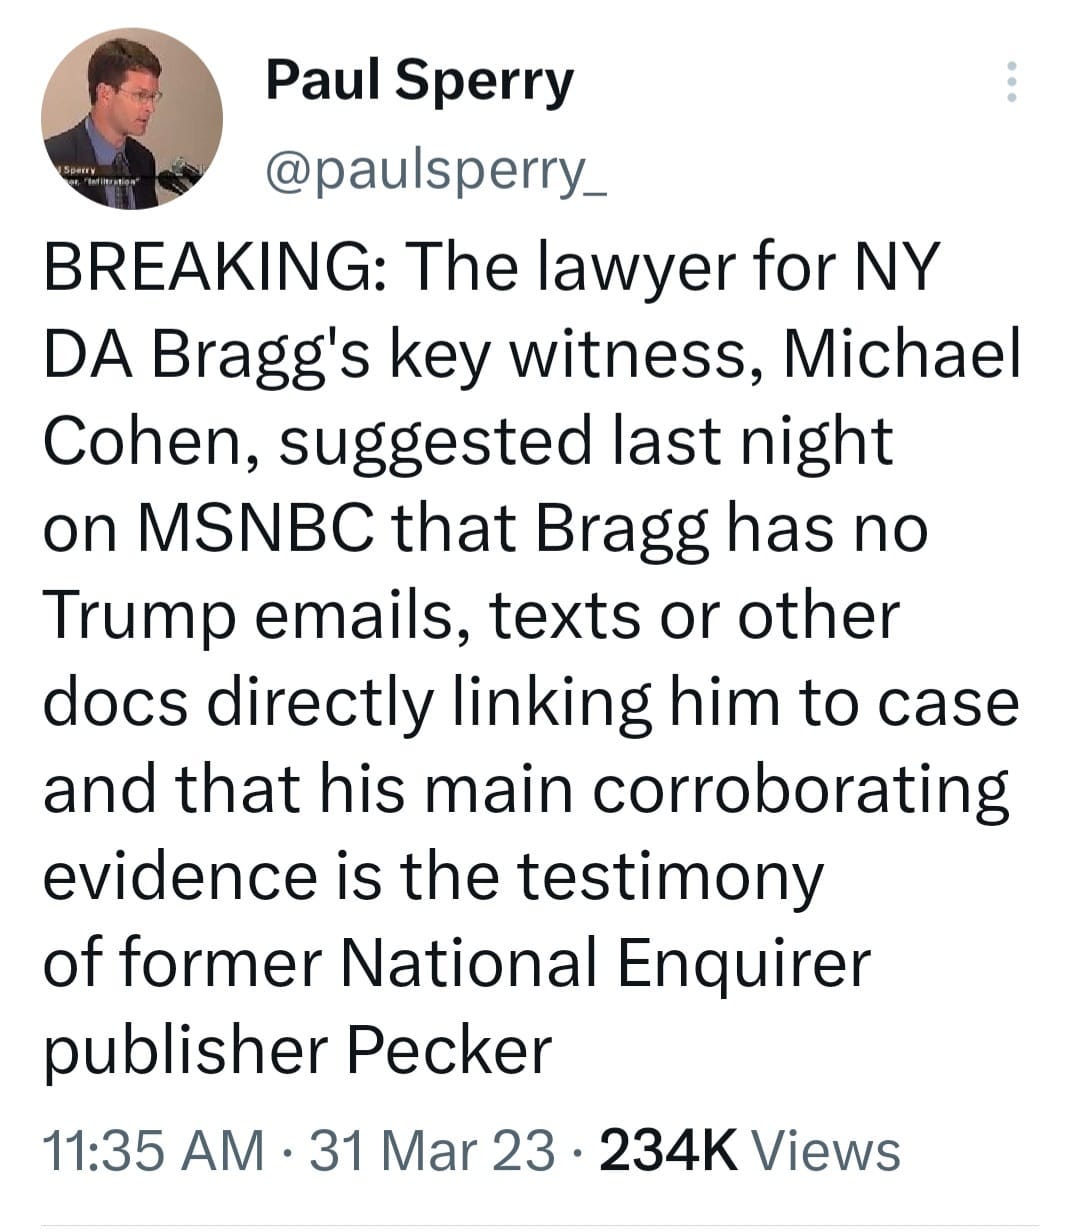 May be a Twitter screenshot of 1 person and text that says 'Paul Sperry @..y_ BREAKING: The lawyer for NY DA Bragg's key witness, Michael Cohen, suggested last night on MSNBC that Bragg has no Trump emails, texts or other docs directly linking him to case and that his main corroborating evidence is the testimony of former National Enquirer publisher Pecker 11:35 AM 31 Mar 23. 234K Ûiews'